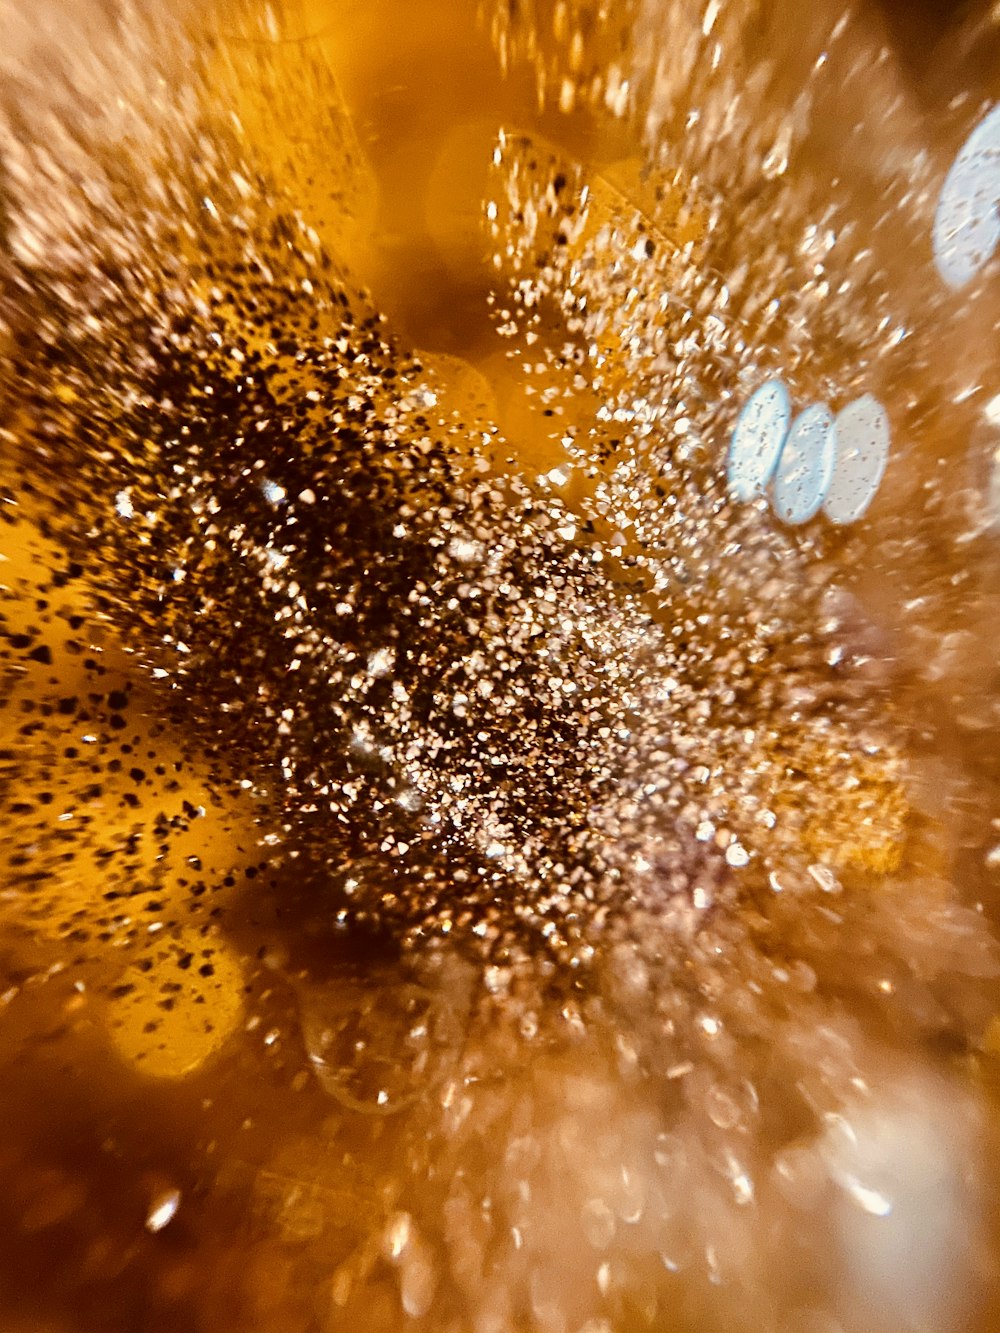 water droplets on brown wooden surface